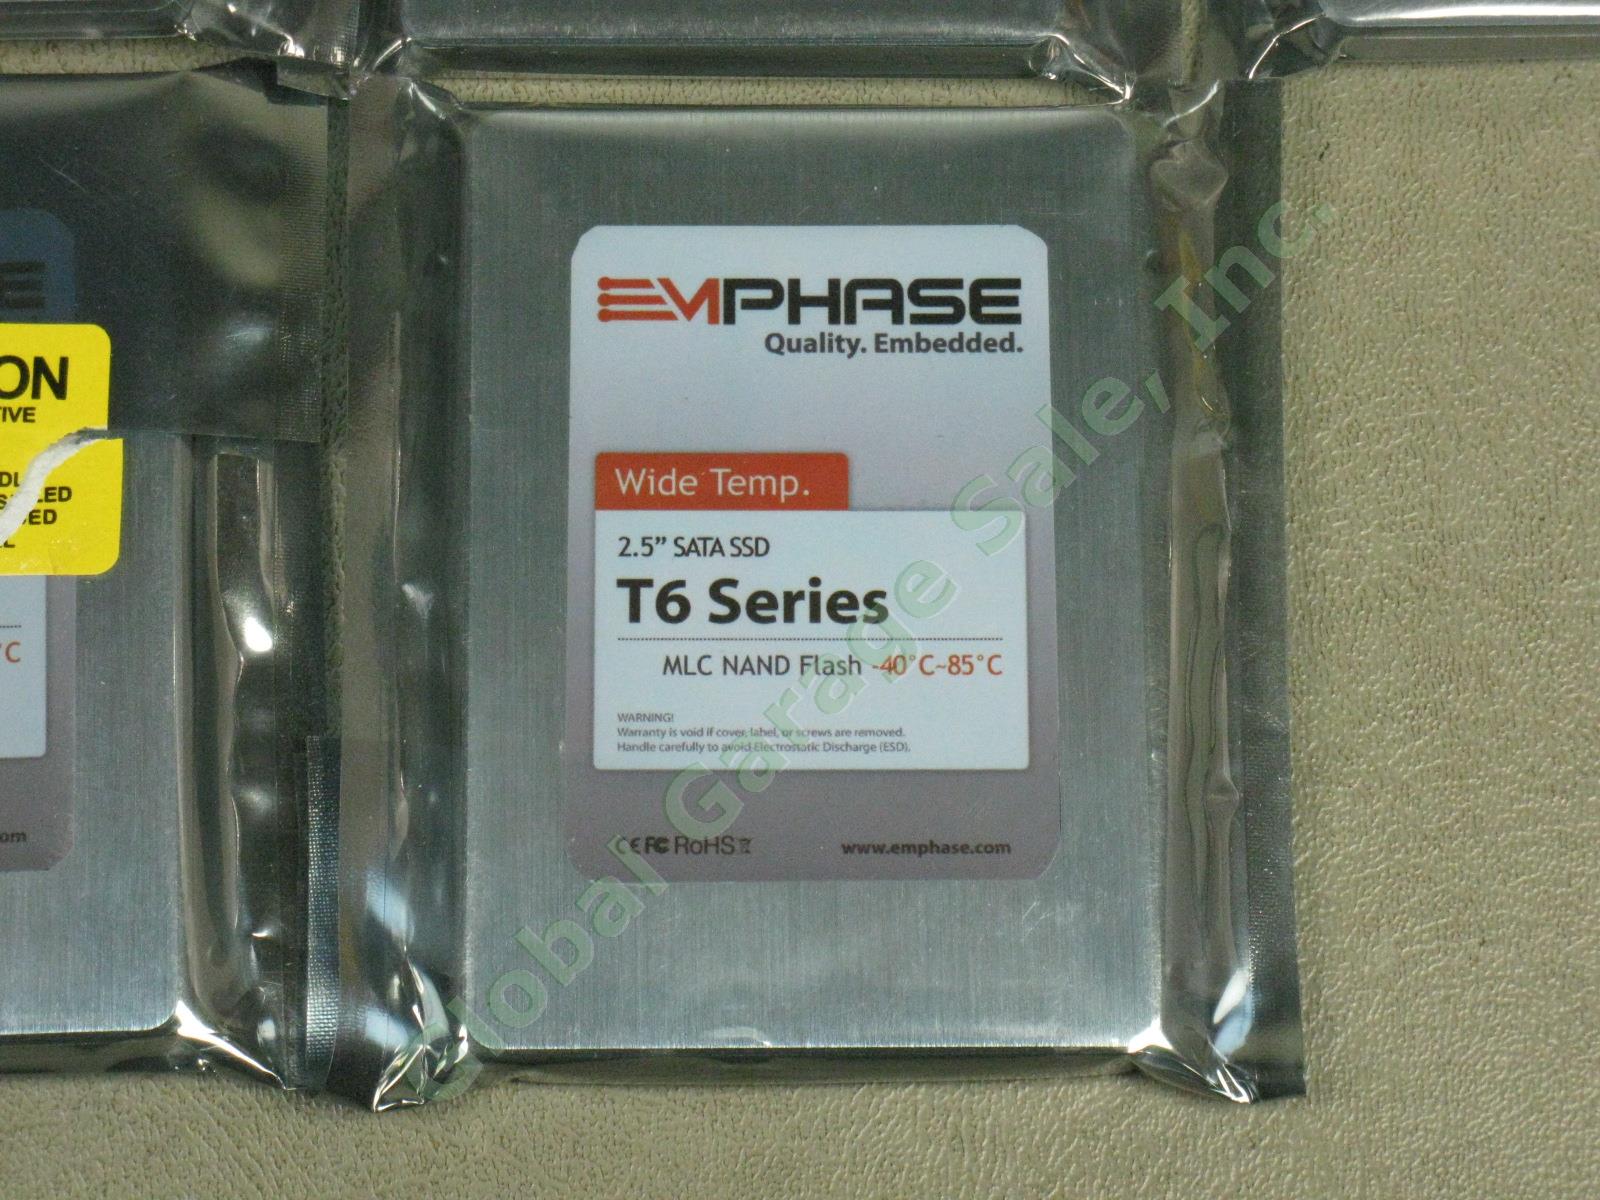 10 NEW Emphase T6 2.5" MLC NAND 60GB SSD Industrial Temperature Hard Drive Lot 1